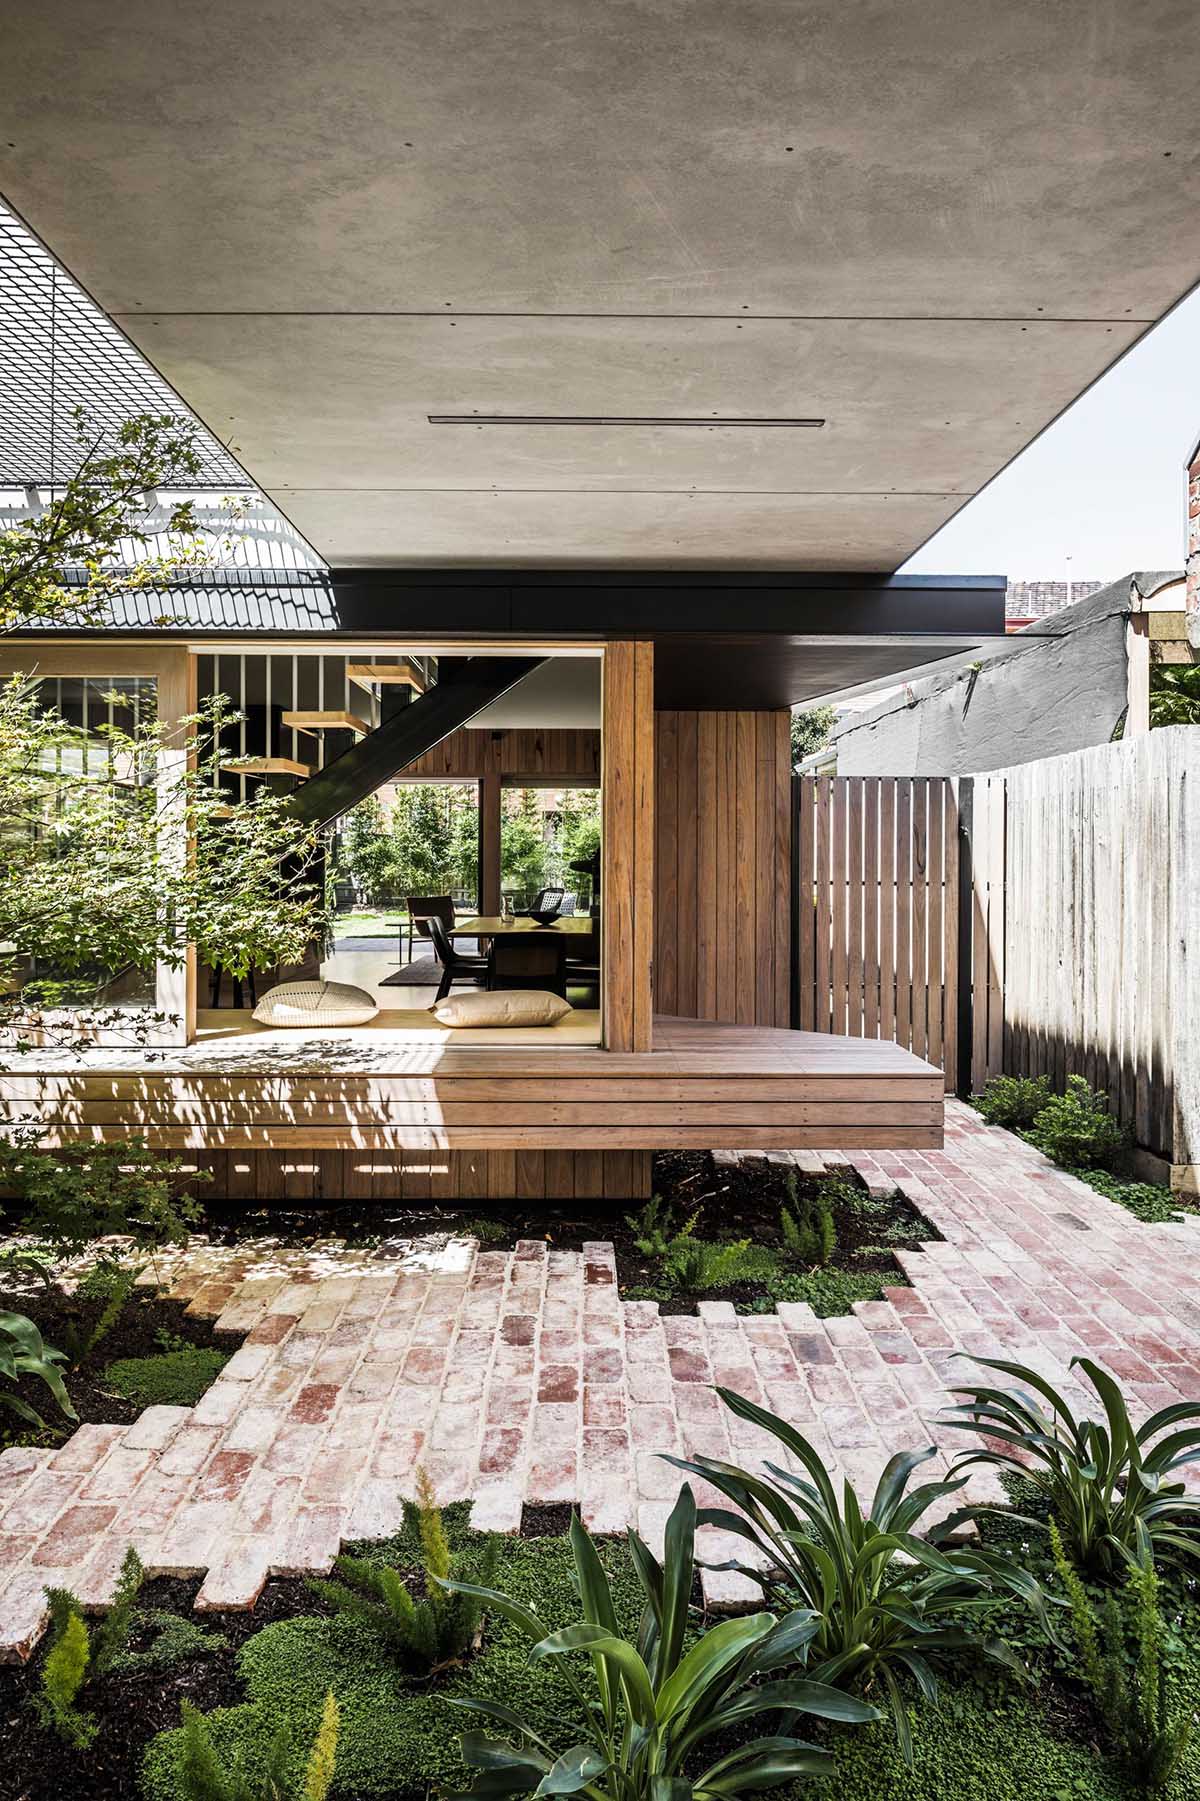 Connecting the interior spaces with the carport of this modern home, is a small courtyard with bricks surrounding small pockets of greenery. In the open space above, there's a net for relaxing in the sun.